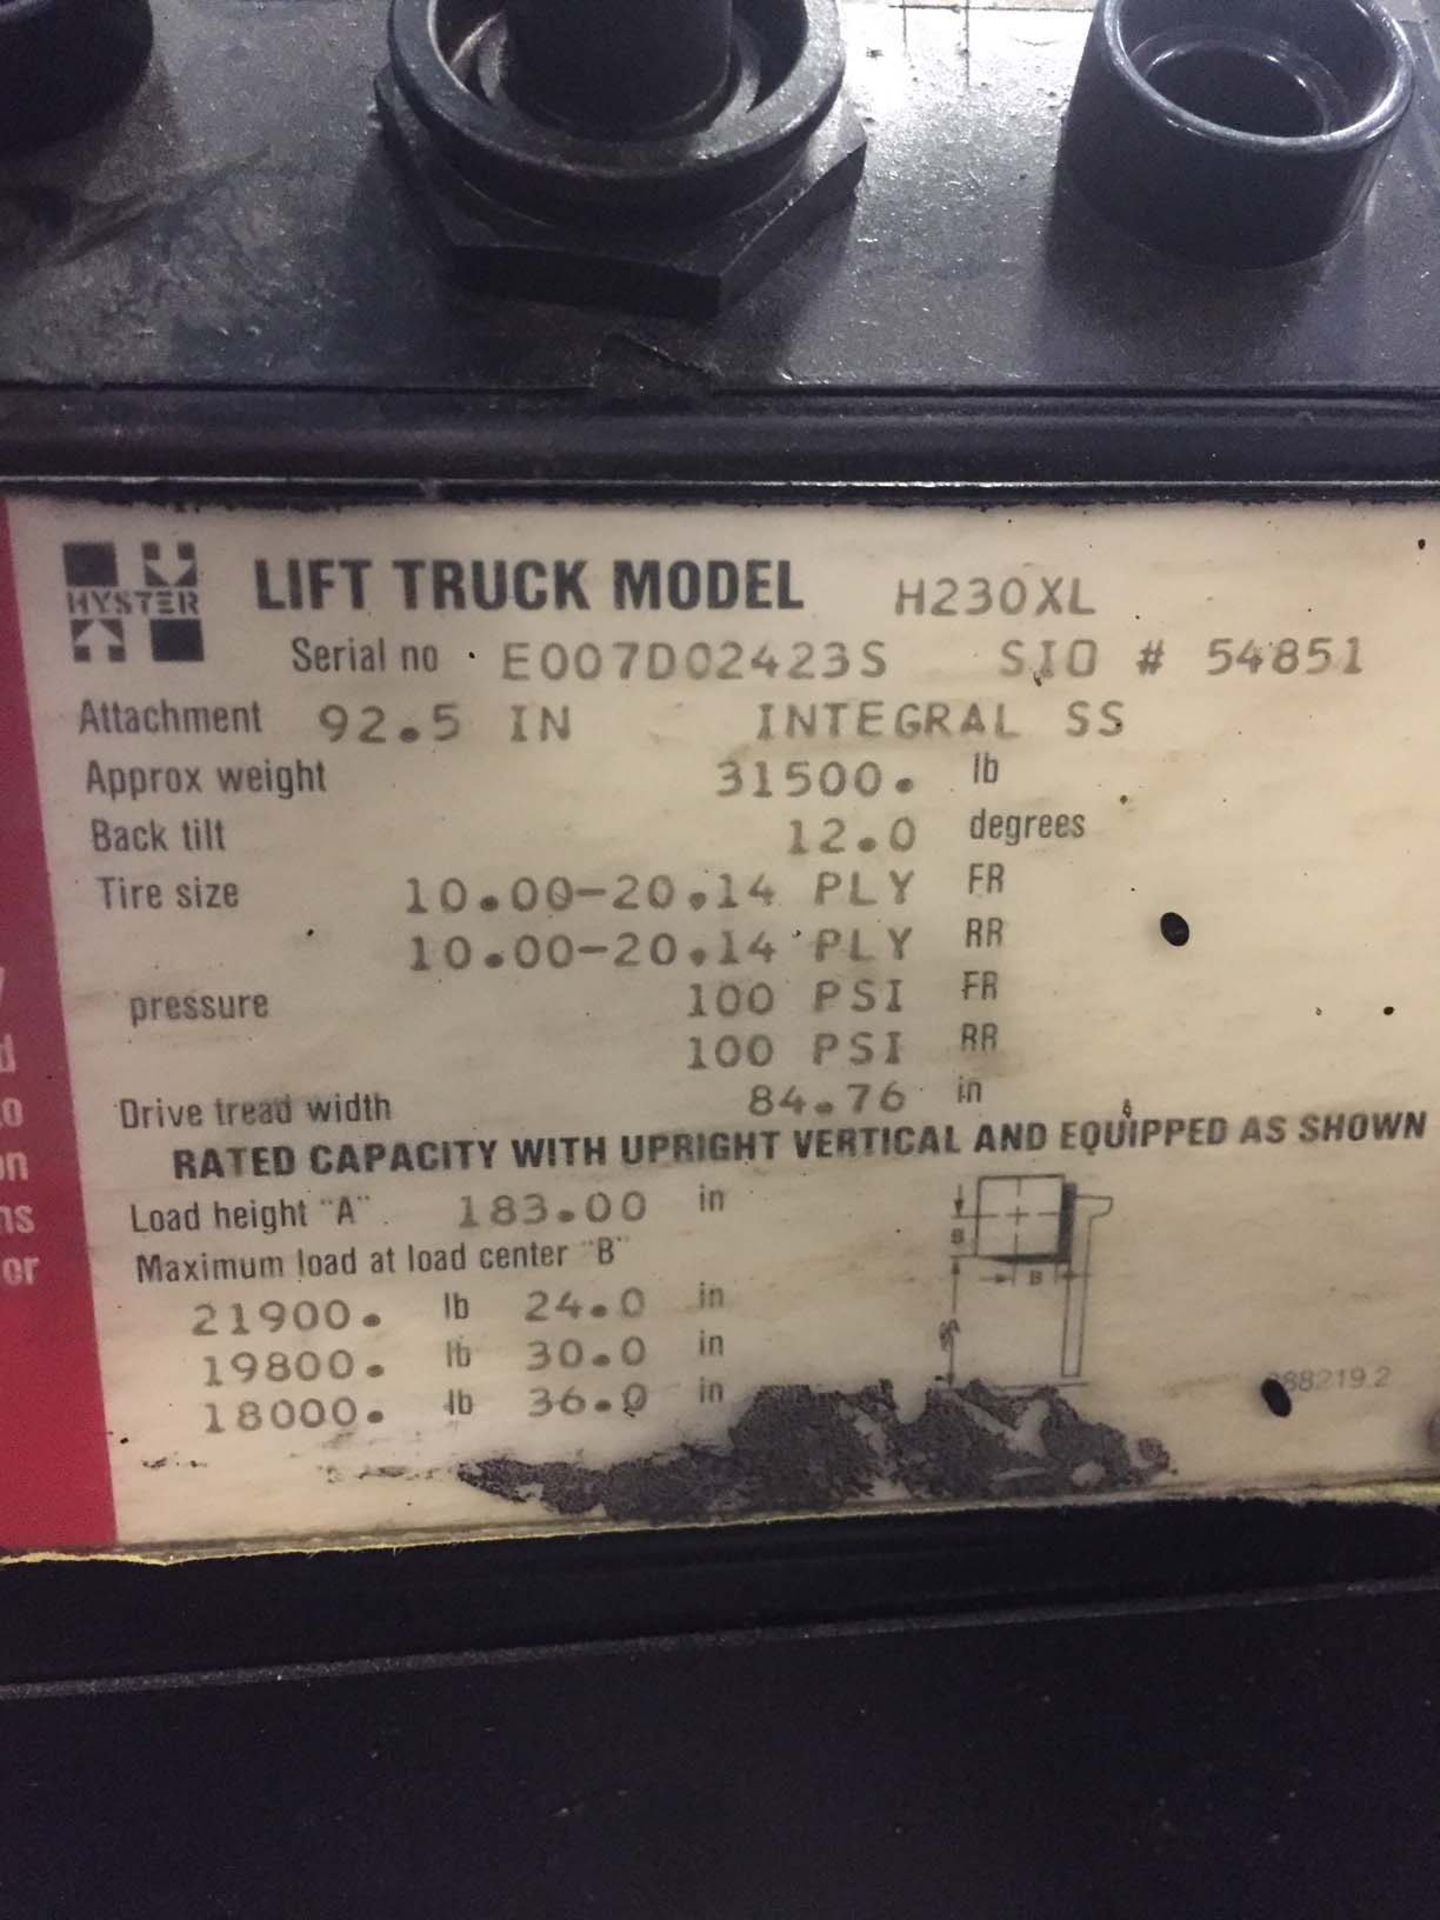 LARGE CAPACITY FORKLIFT, HYSTER 23,000 LB. CAP. MDL. H230XL, LPG, 183" max. lift ht., 2-stage mast, - Image 8 of 8